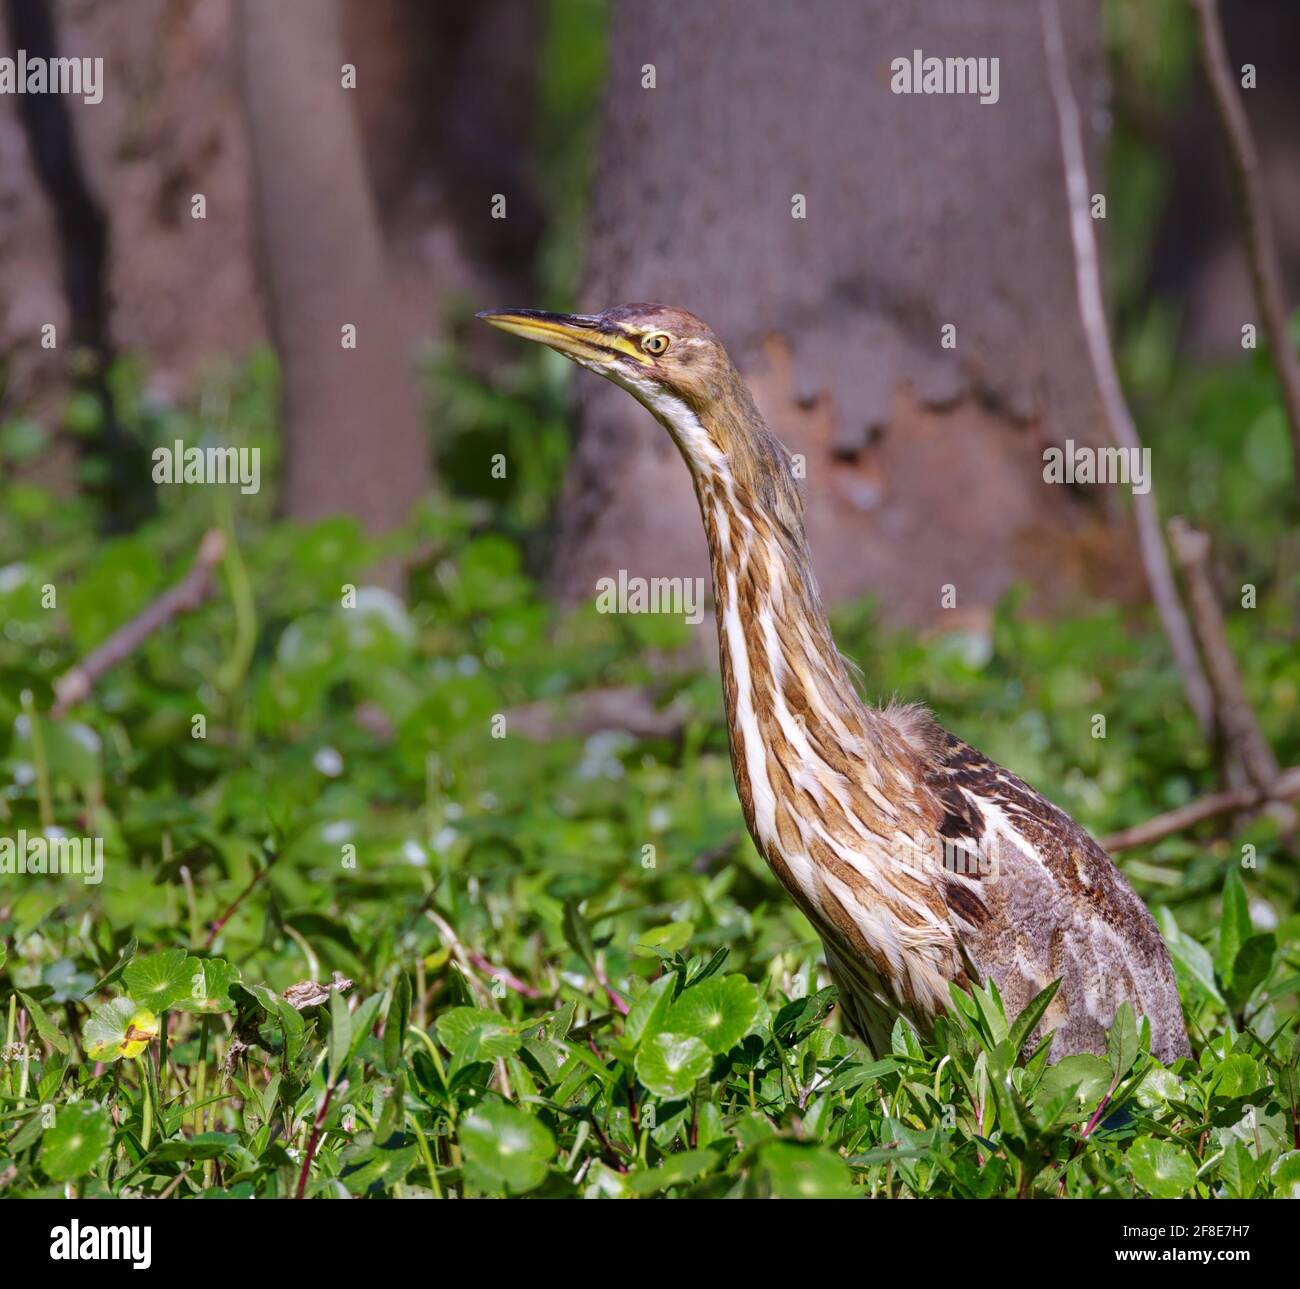 American bittern (Botaurus lentiginosus) stretches neck looking for prey in a forest swamp, Brazos Bend State Park, Texas, USA. Stock Photo